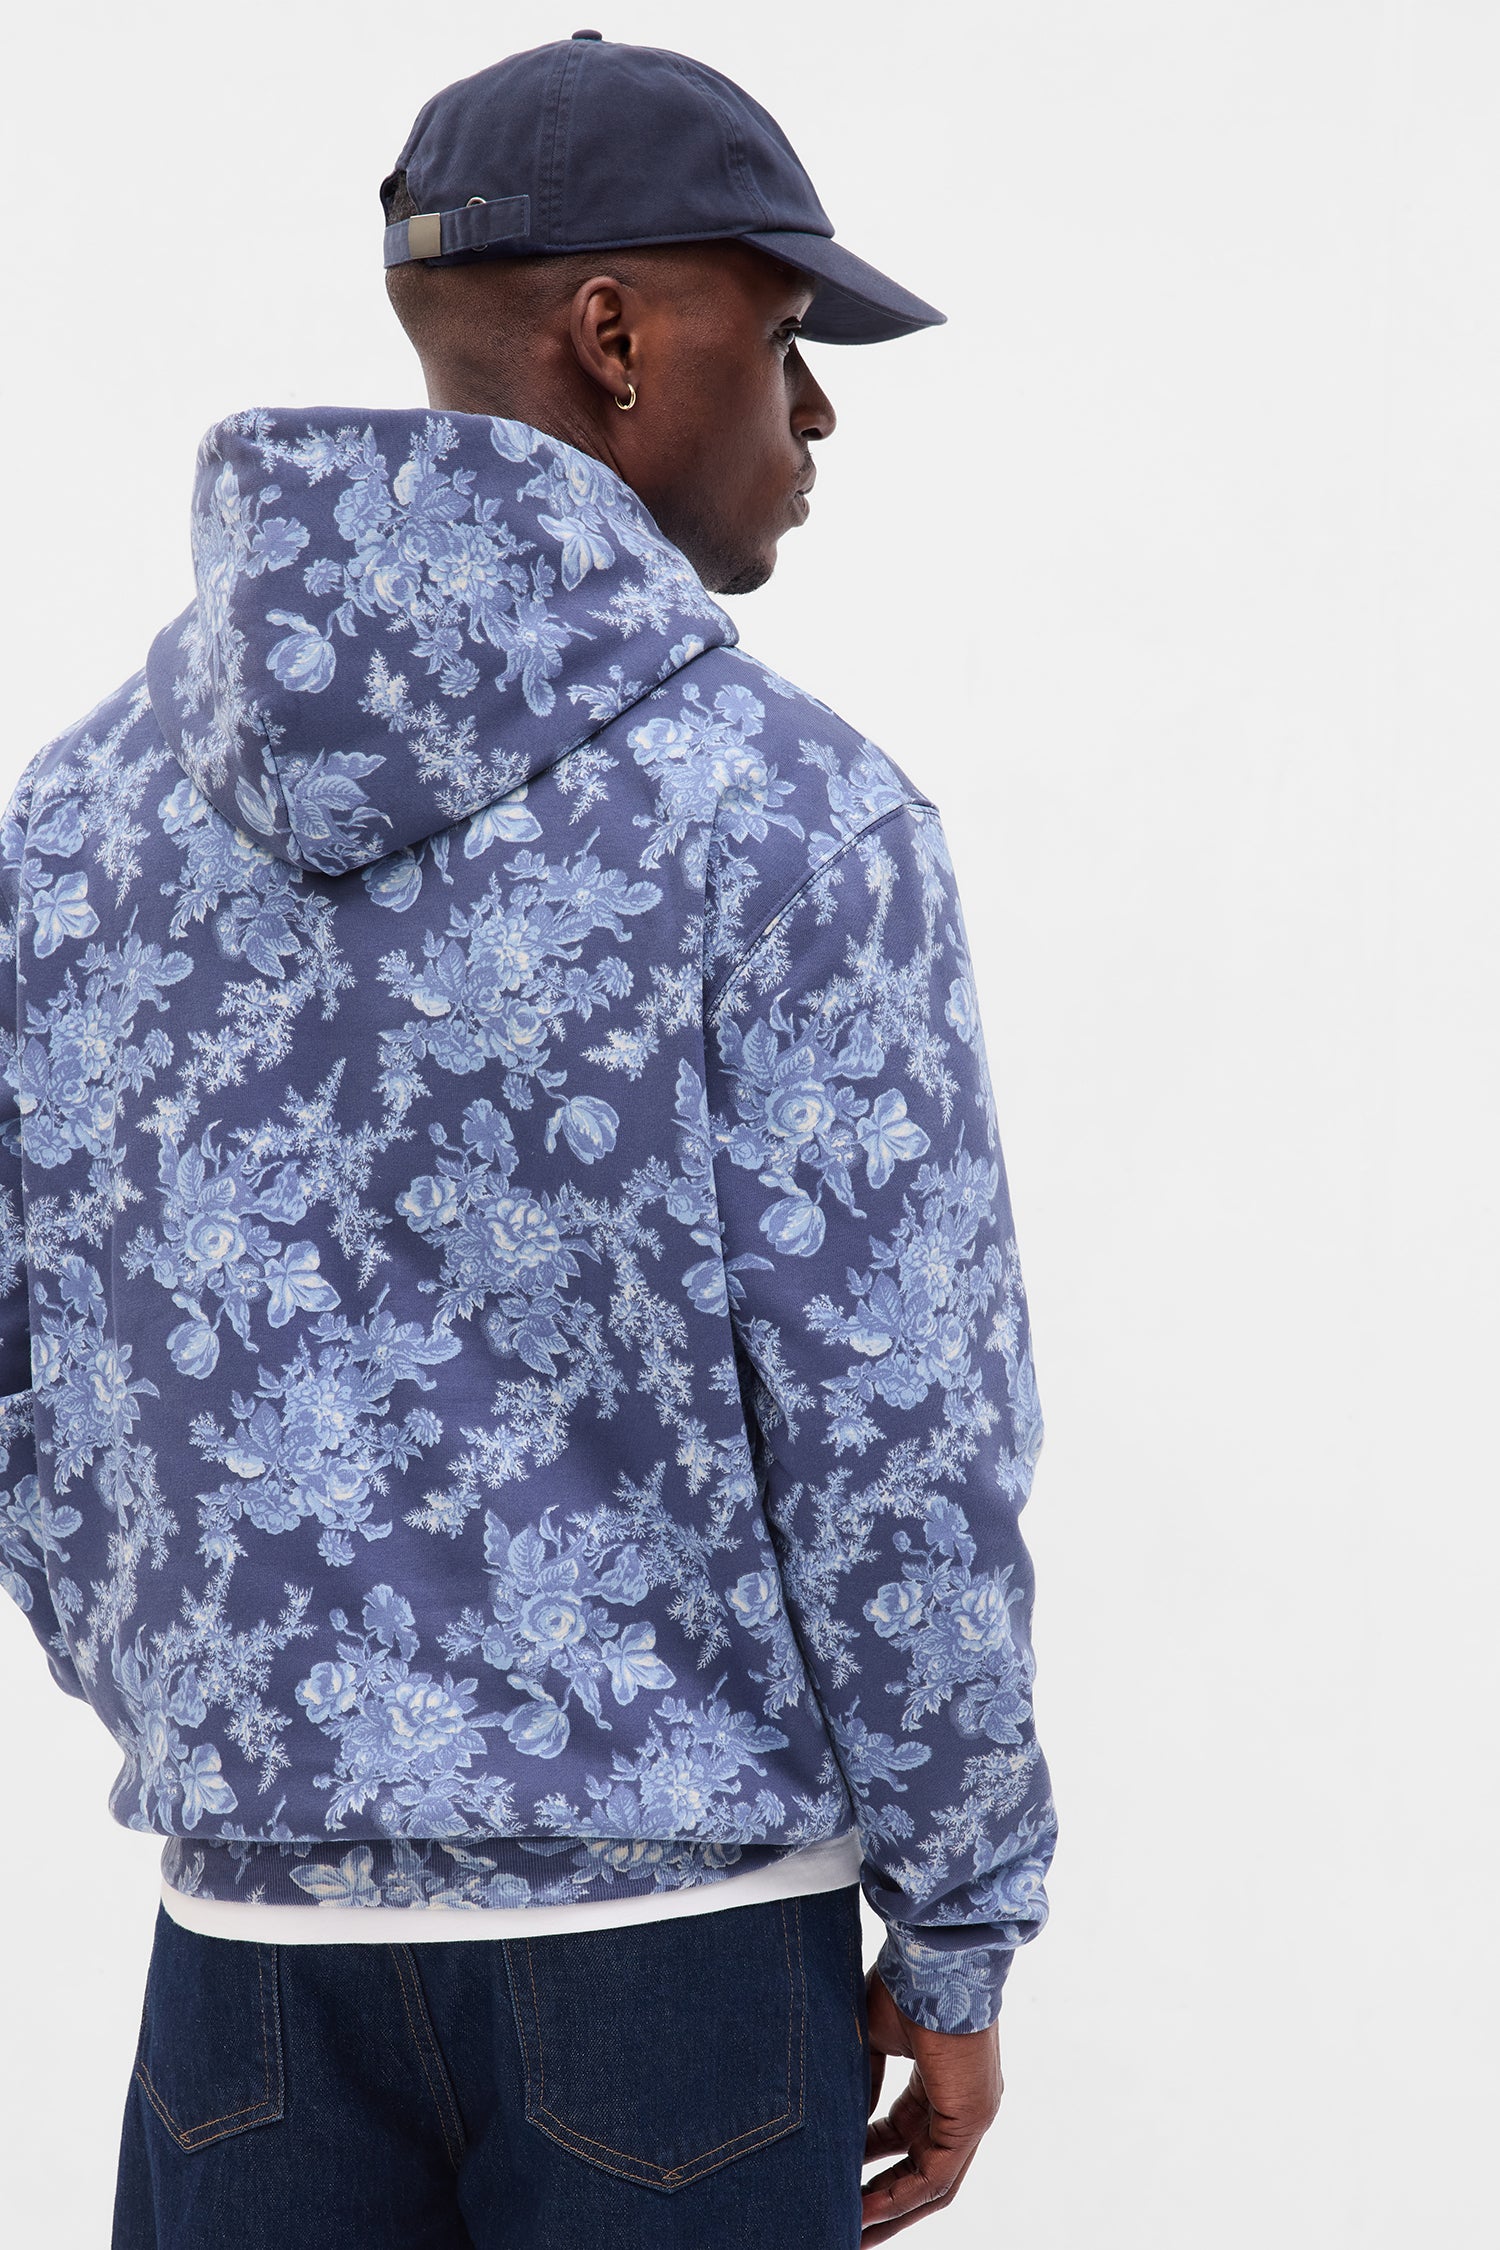 Back image of model wearing men's blue floral hoodie with GAP logo at chest